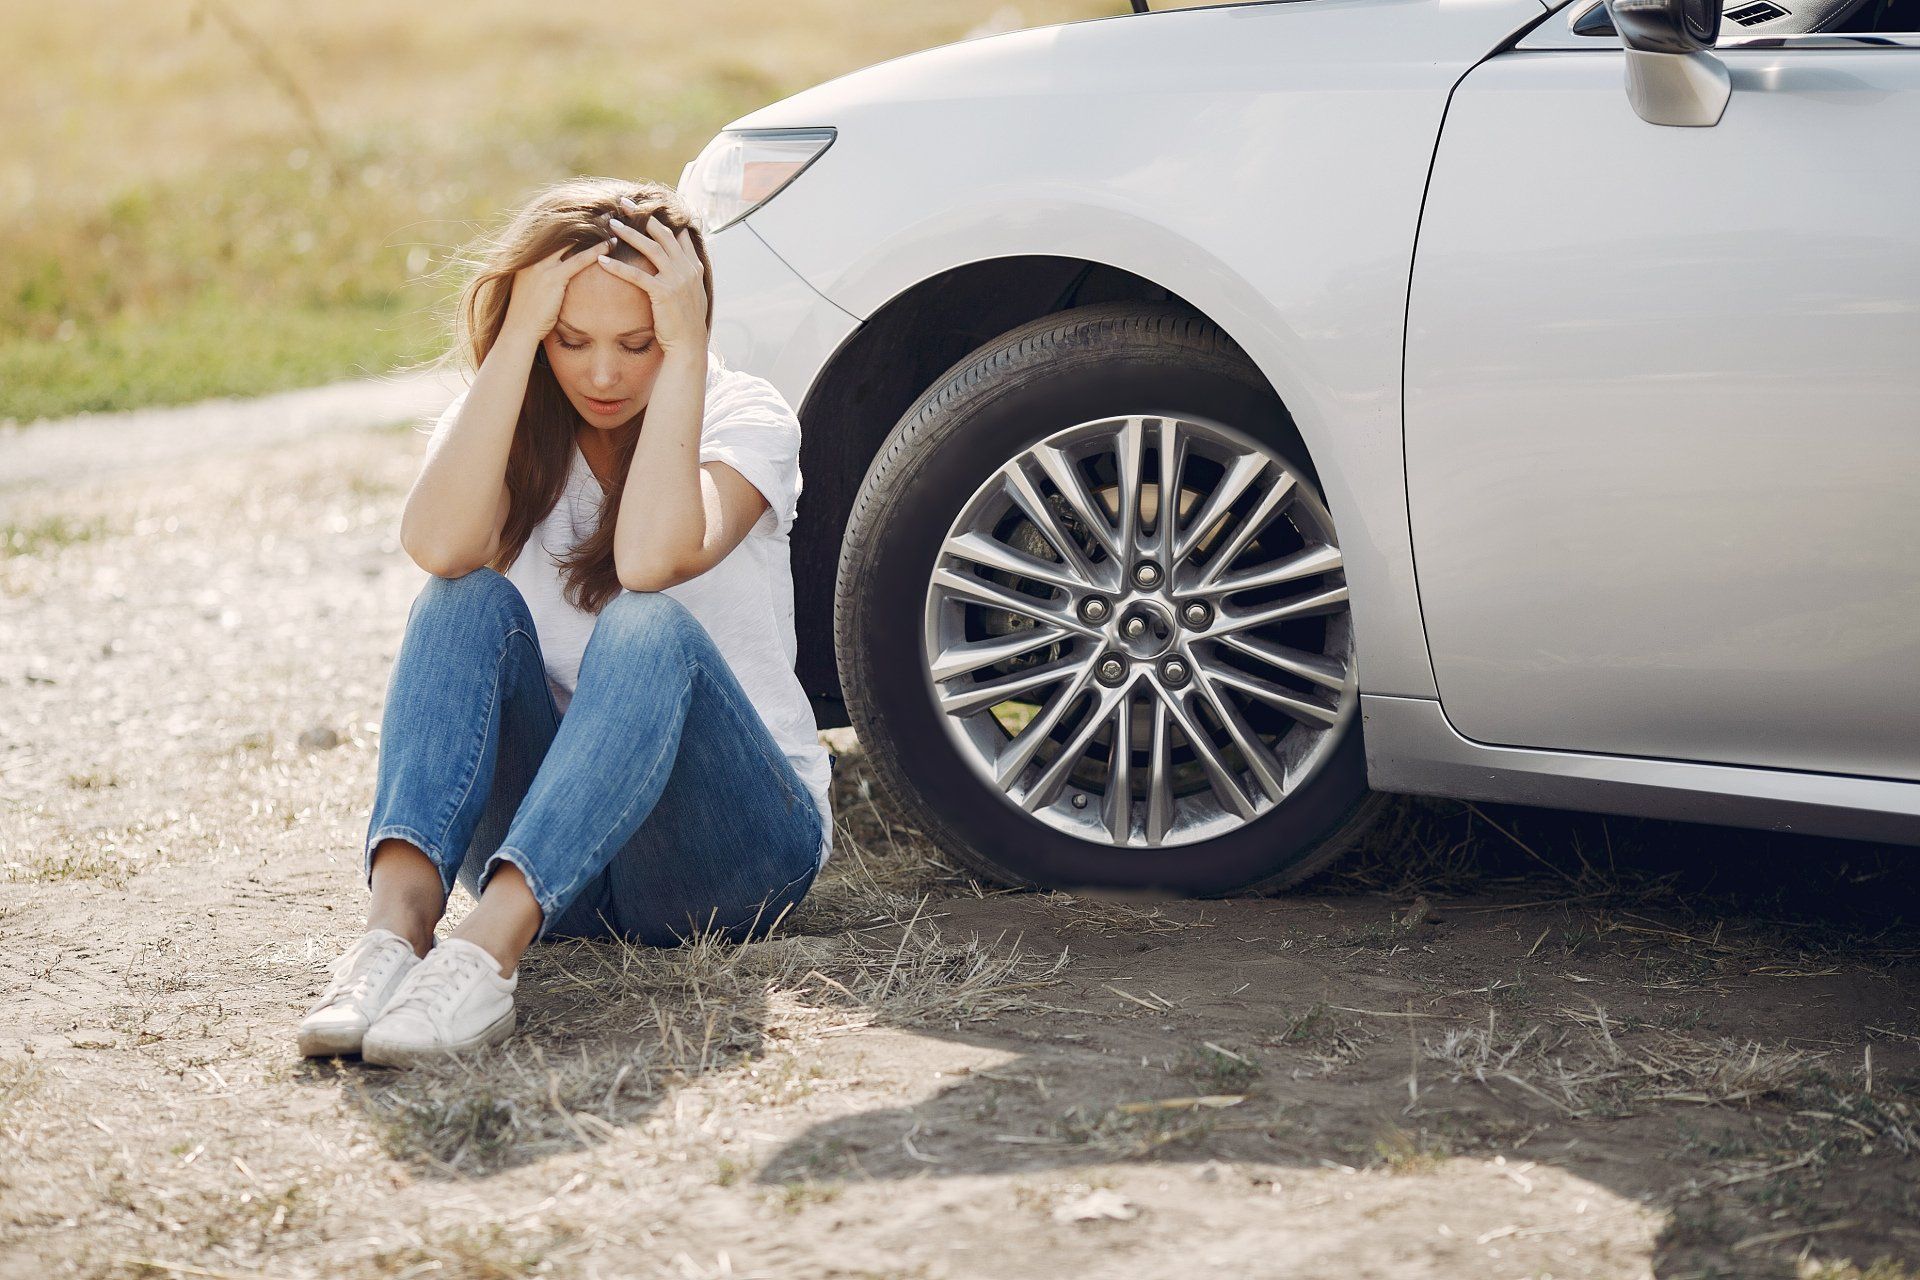 Upset women by car - transmission failing that requires transmission repair